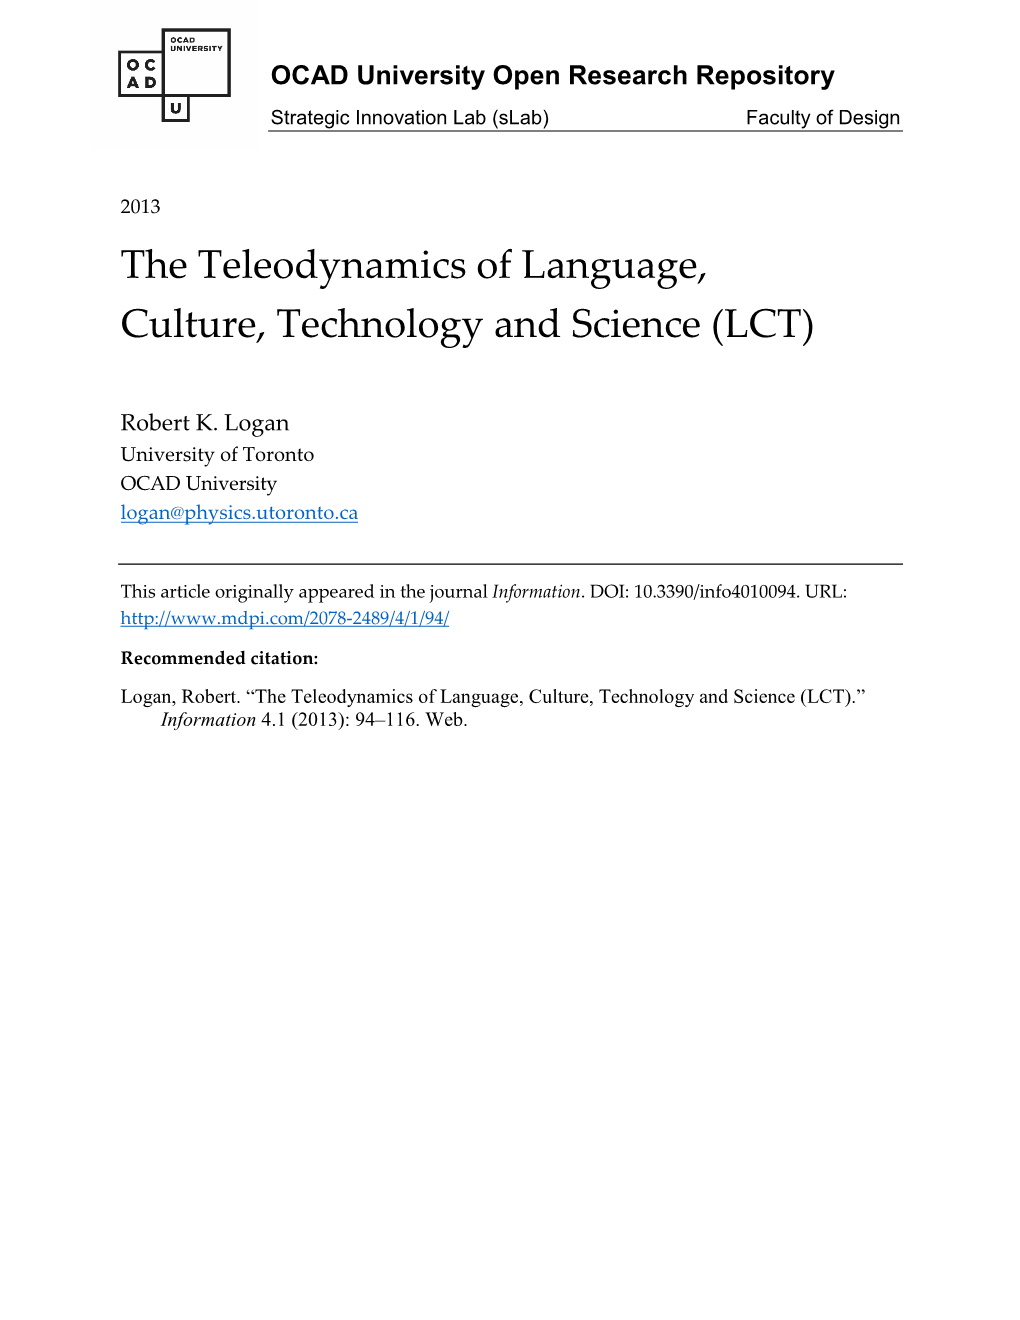 The Teleodynamics of Language, Culture, Technology and Science (LCT)